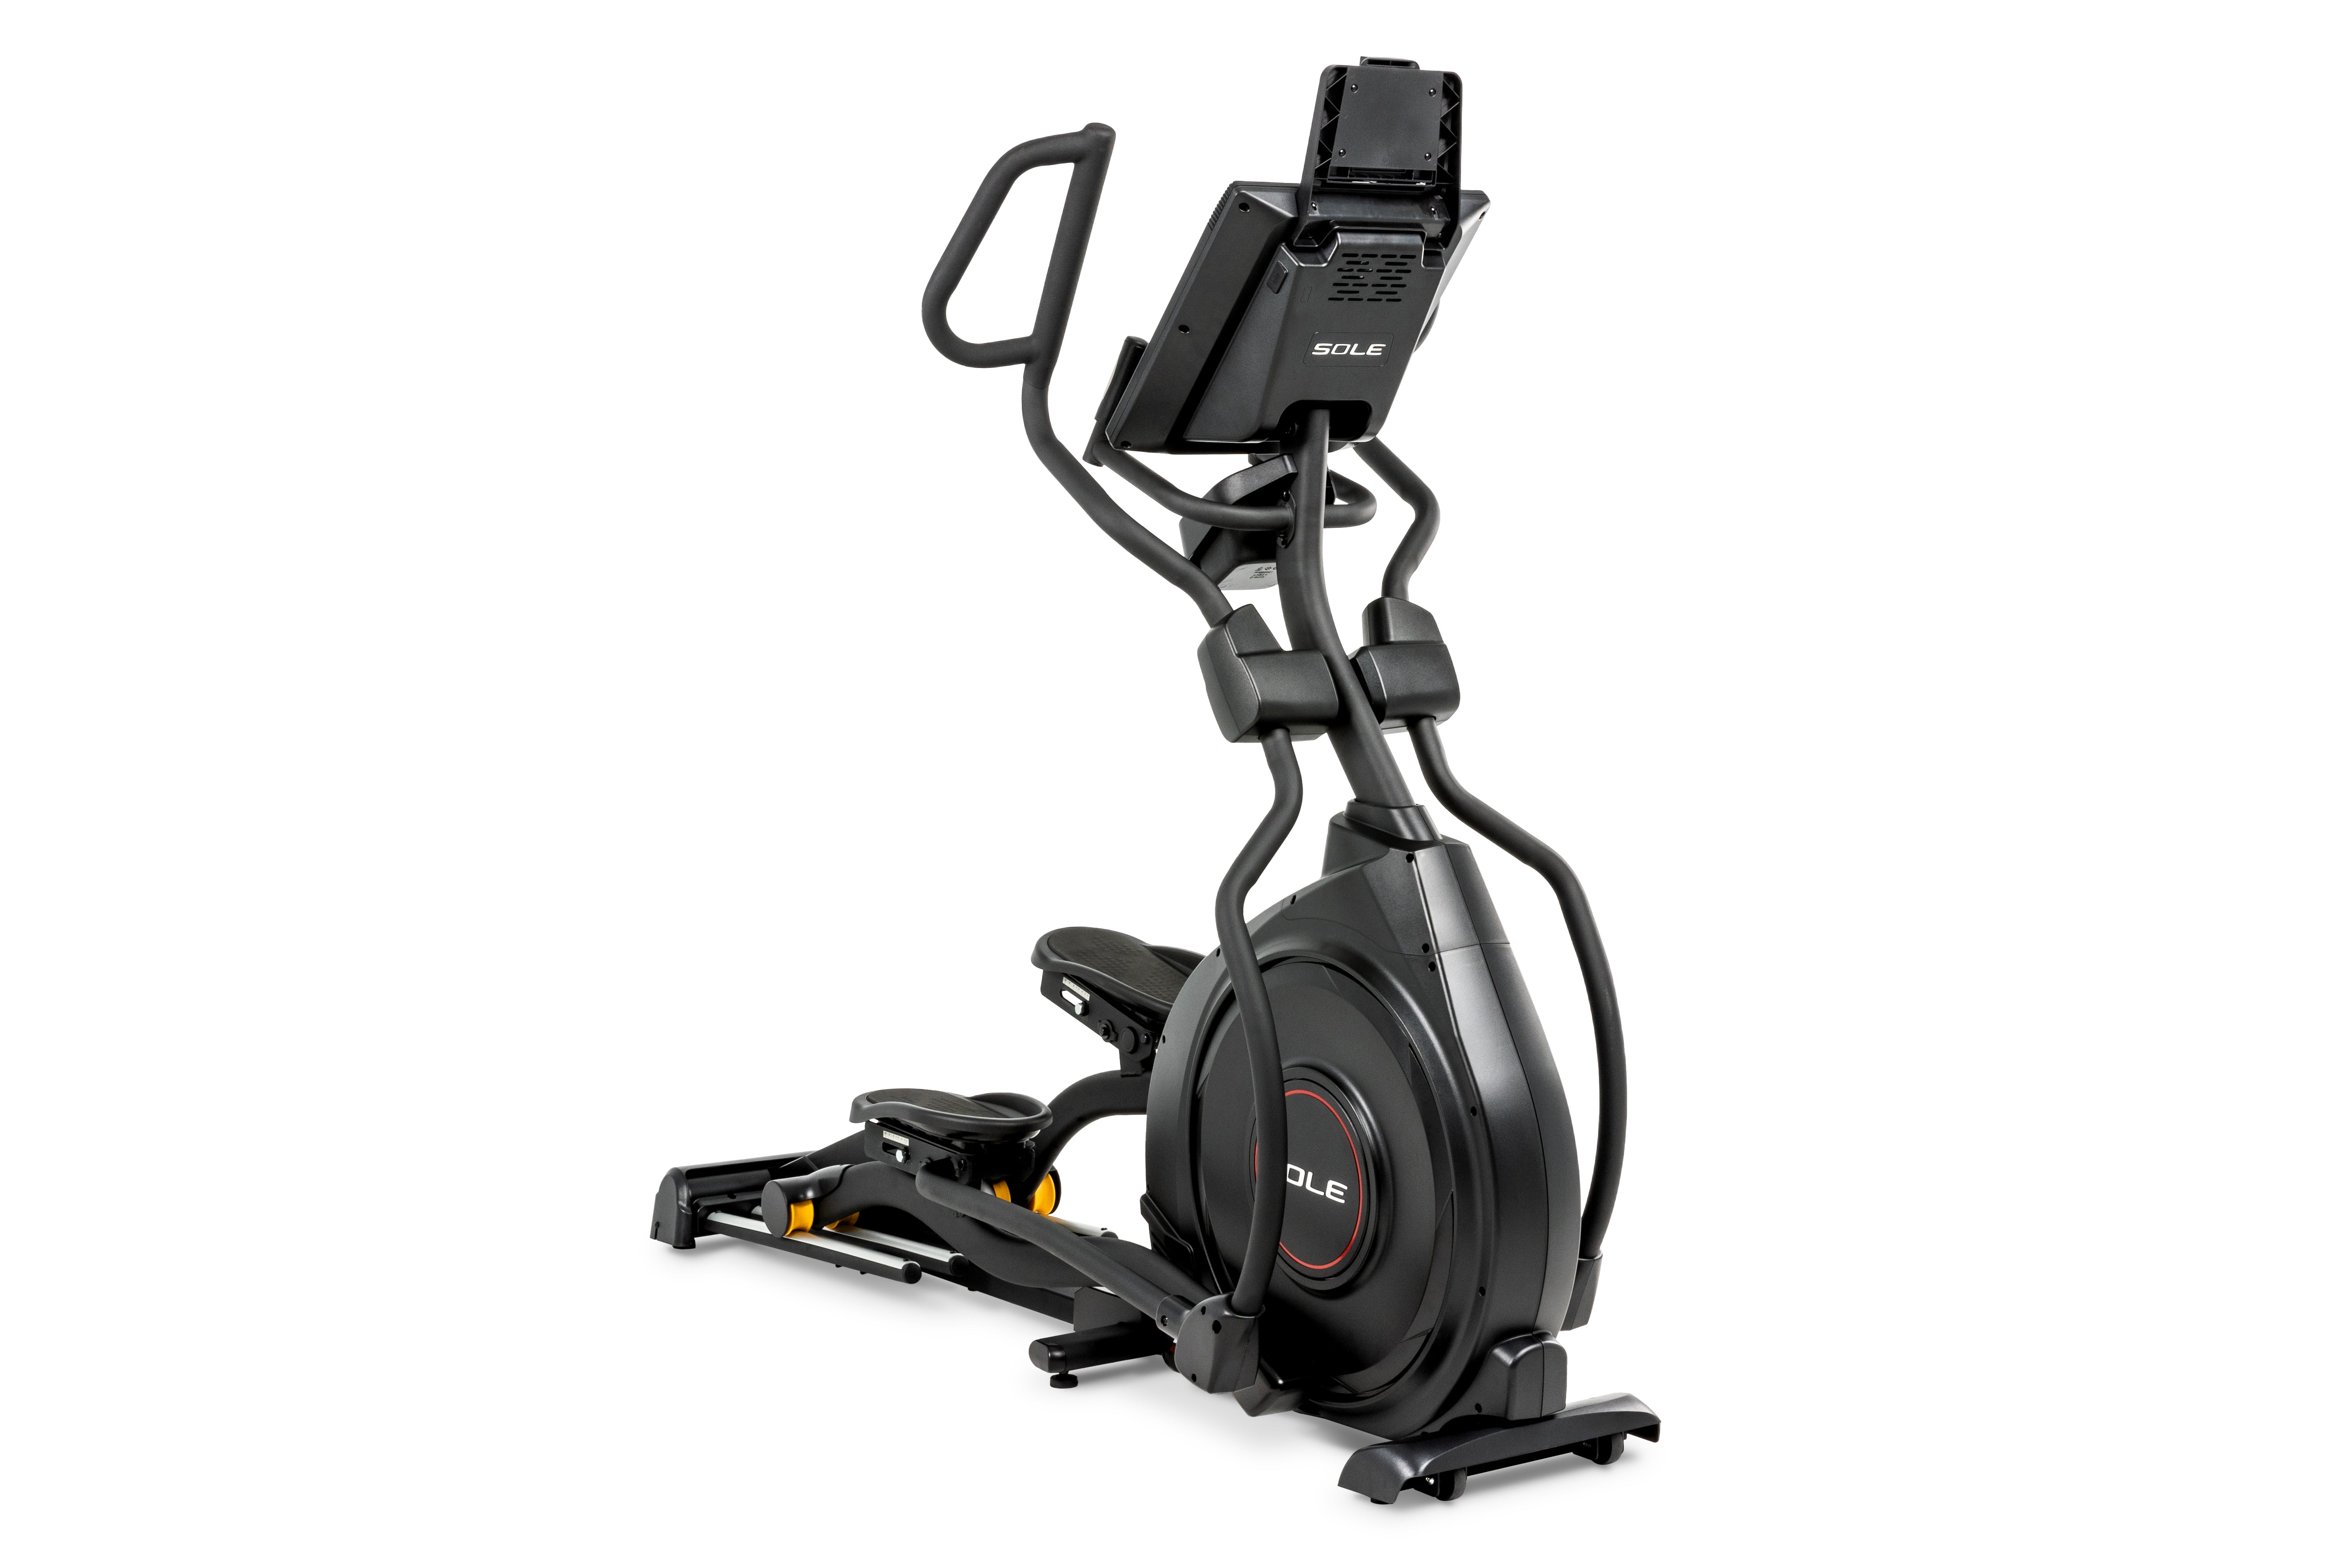 Close-up view of the Sole E95 elliptical trainer, showcasing its sturdy black frame, ergonomic handlebars, and digital console. The flywheel housing has the 'SOLE' branding prominently displayed. The machine is equipped with adjustable foot pedals, a yellow safety mechanism, and a mounted tablet holder on top of the console.